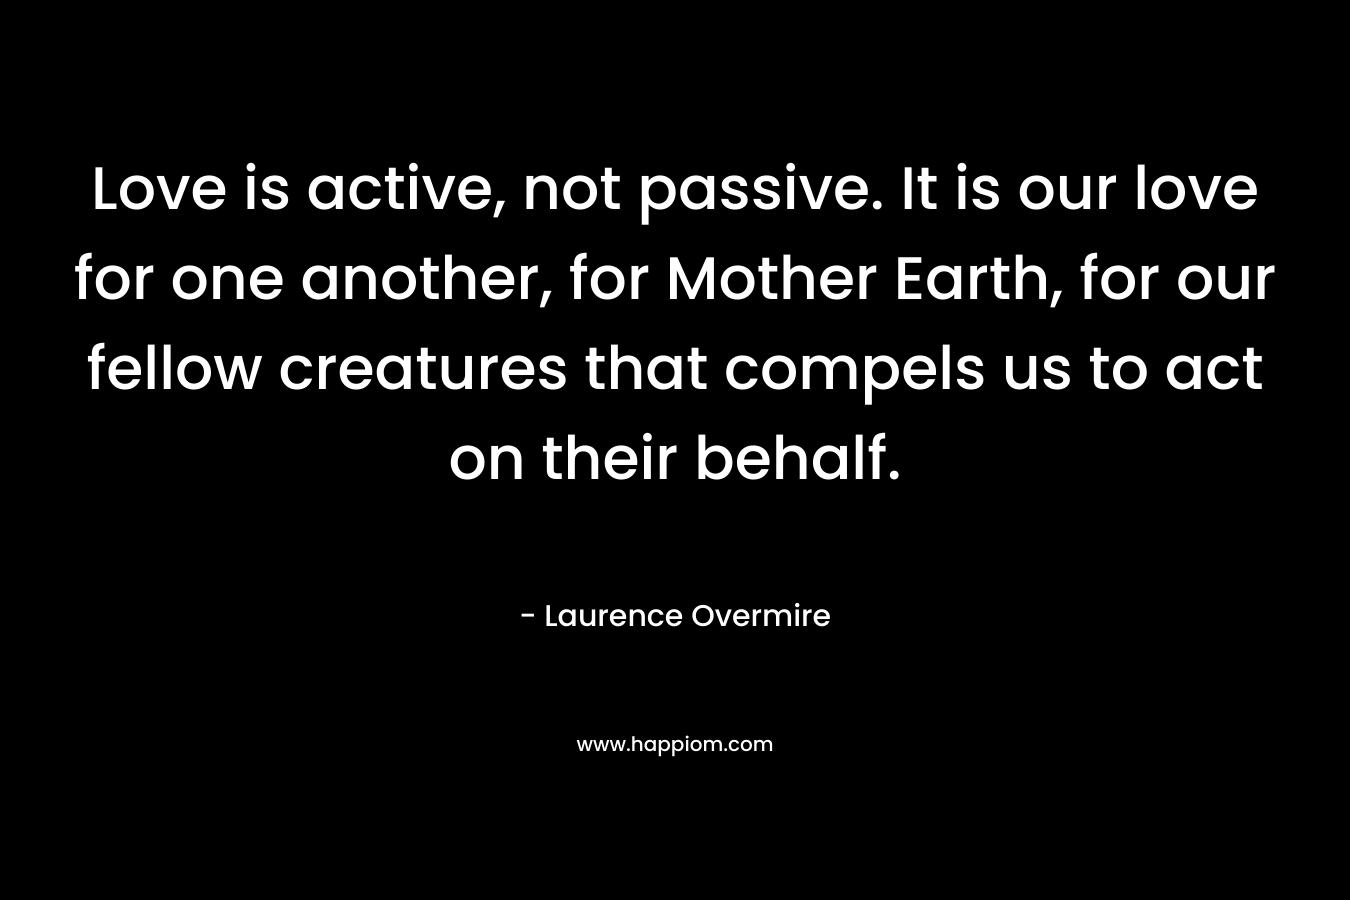 Love is active, not passive. It is our love for one another, for Mother Earth, for our fellow creatures that compels us to act on their behalf. – Laurence Overmire